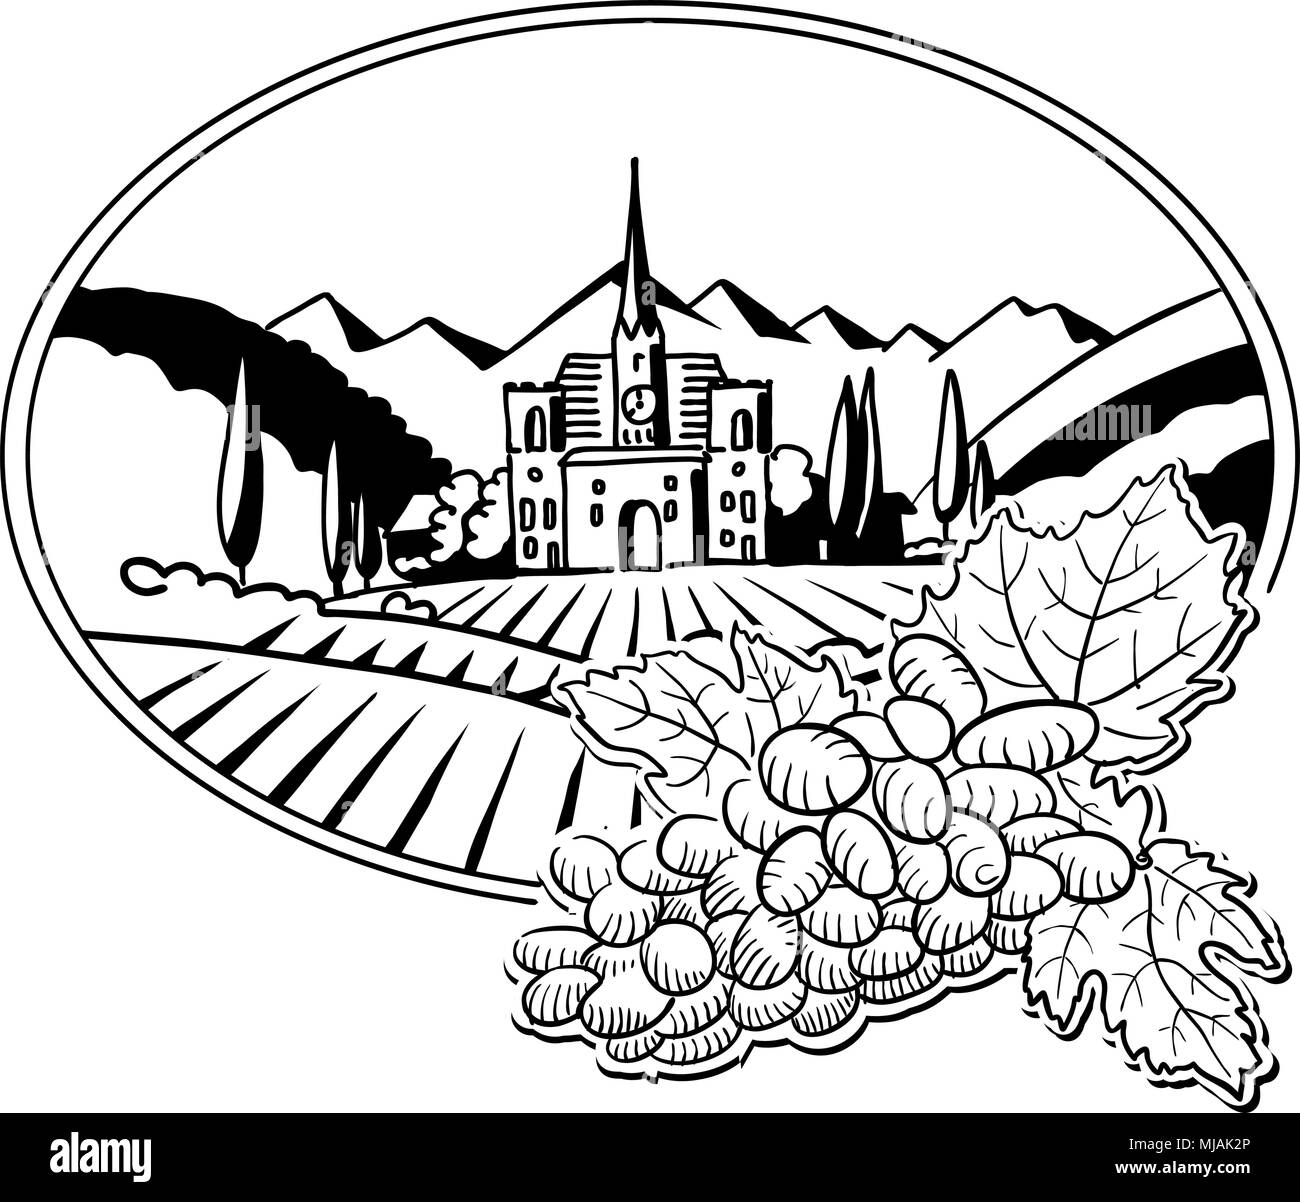 Grapes with Sketched Vineyard Farm Label, Hand drawn Vector Artwork Stock Vector